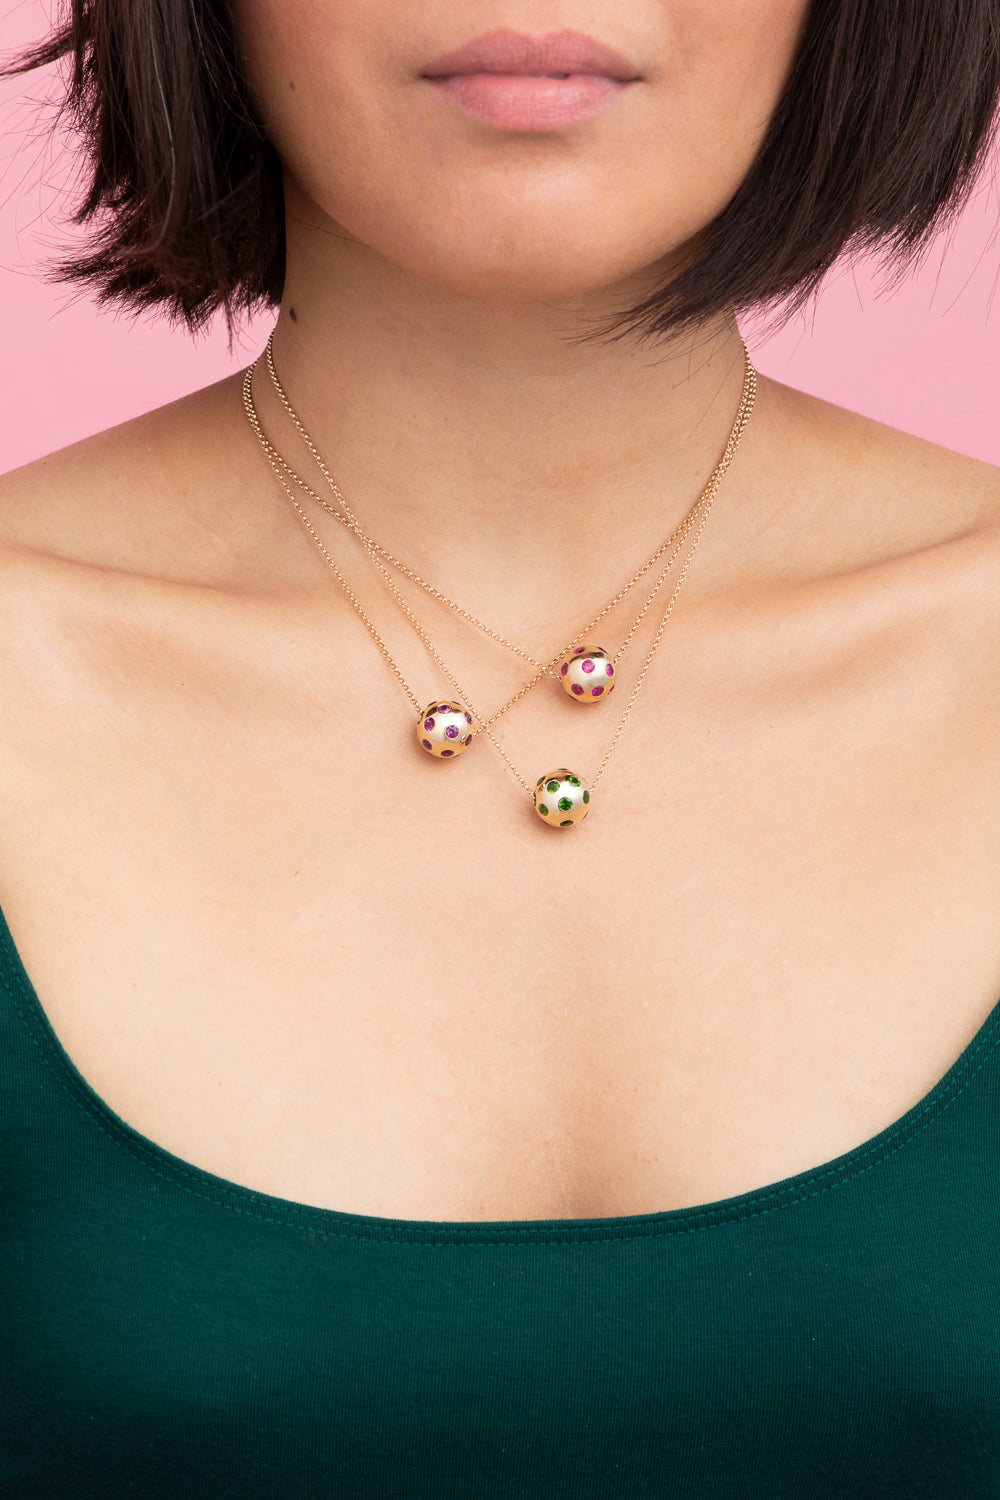 Rachel Quinn Jewelry Polka Dot Sphere Necklaces multiple color options shown stacked on female model neck.